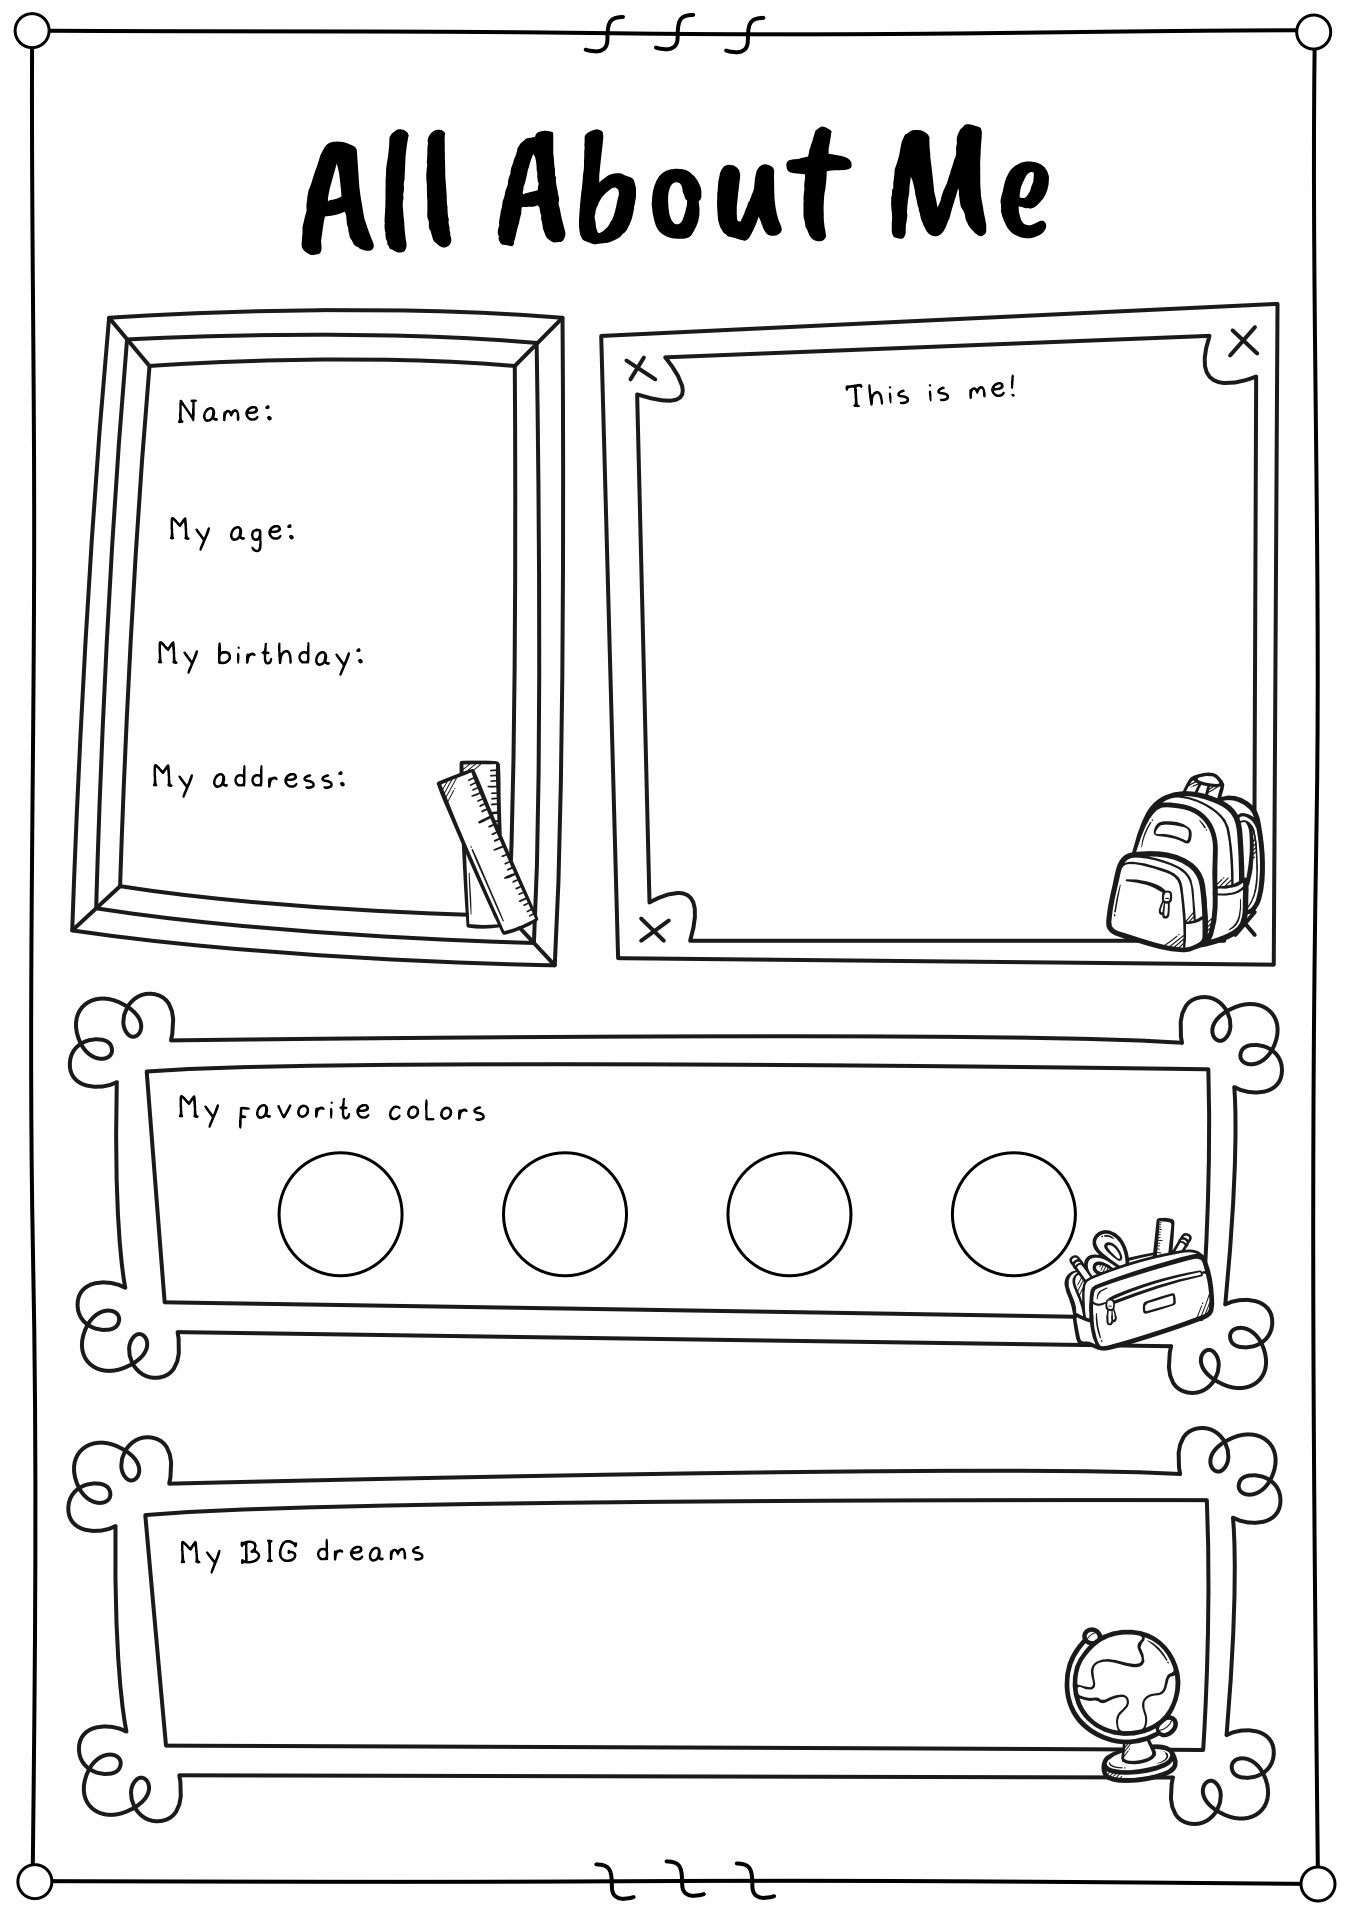 Discover Myself Educational Sheets for Kids